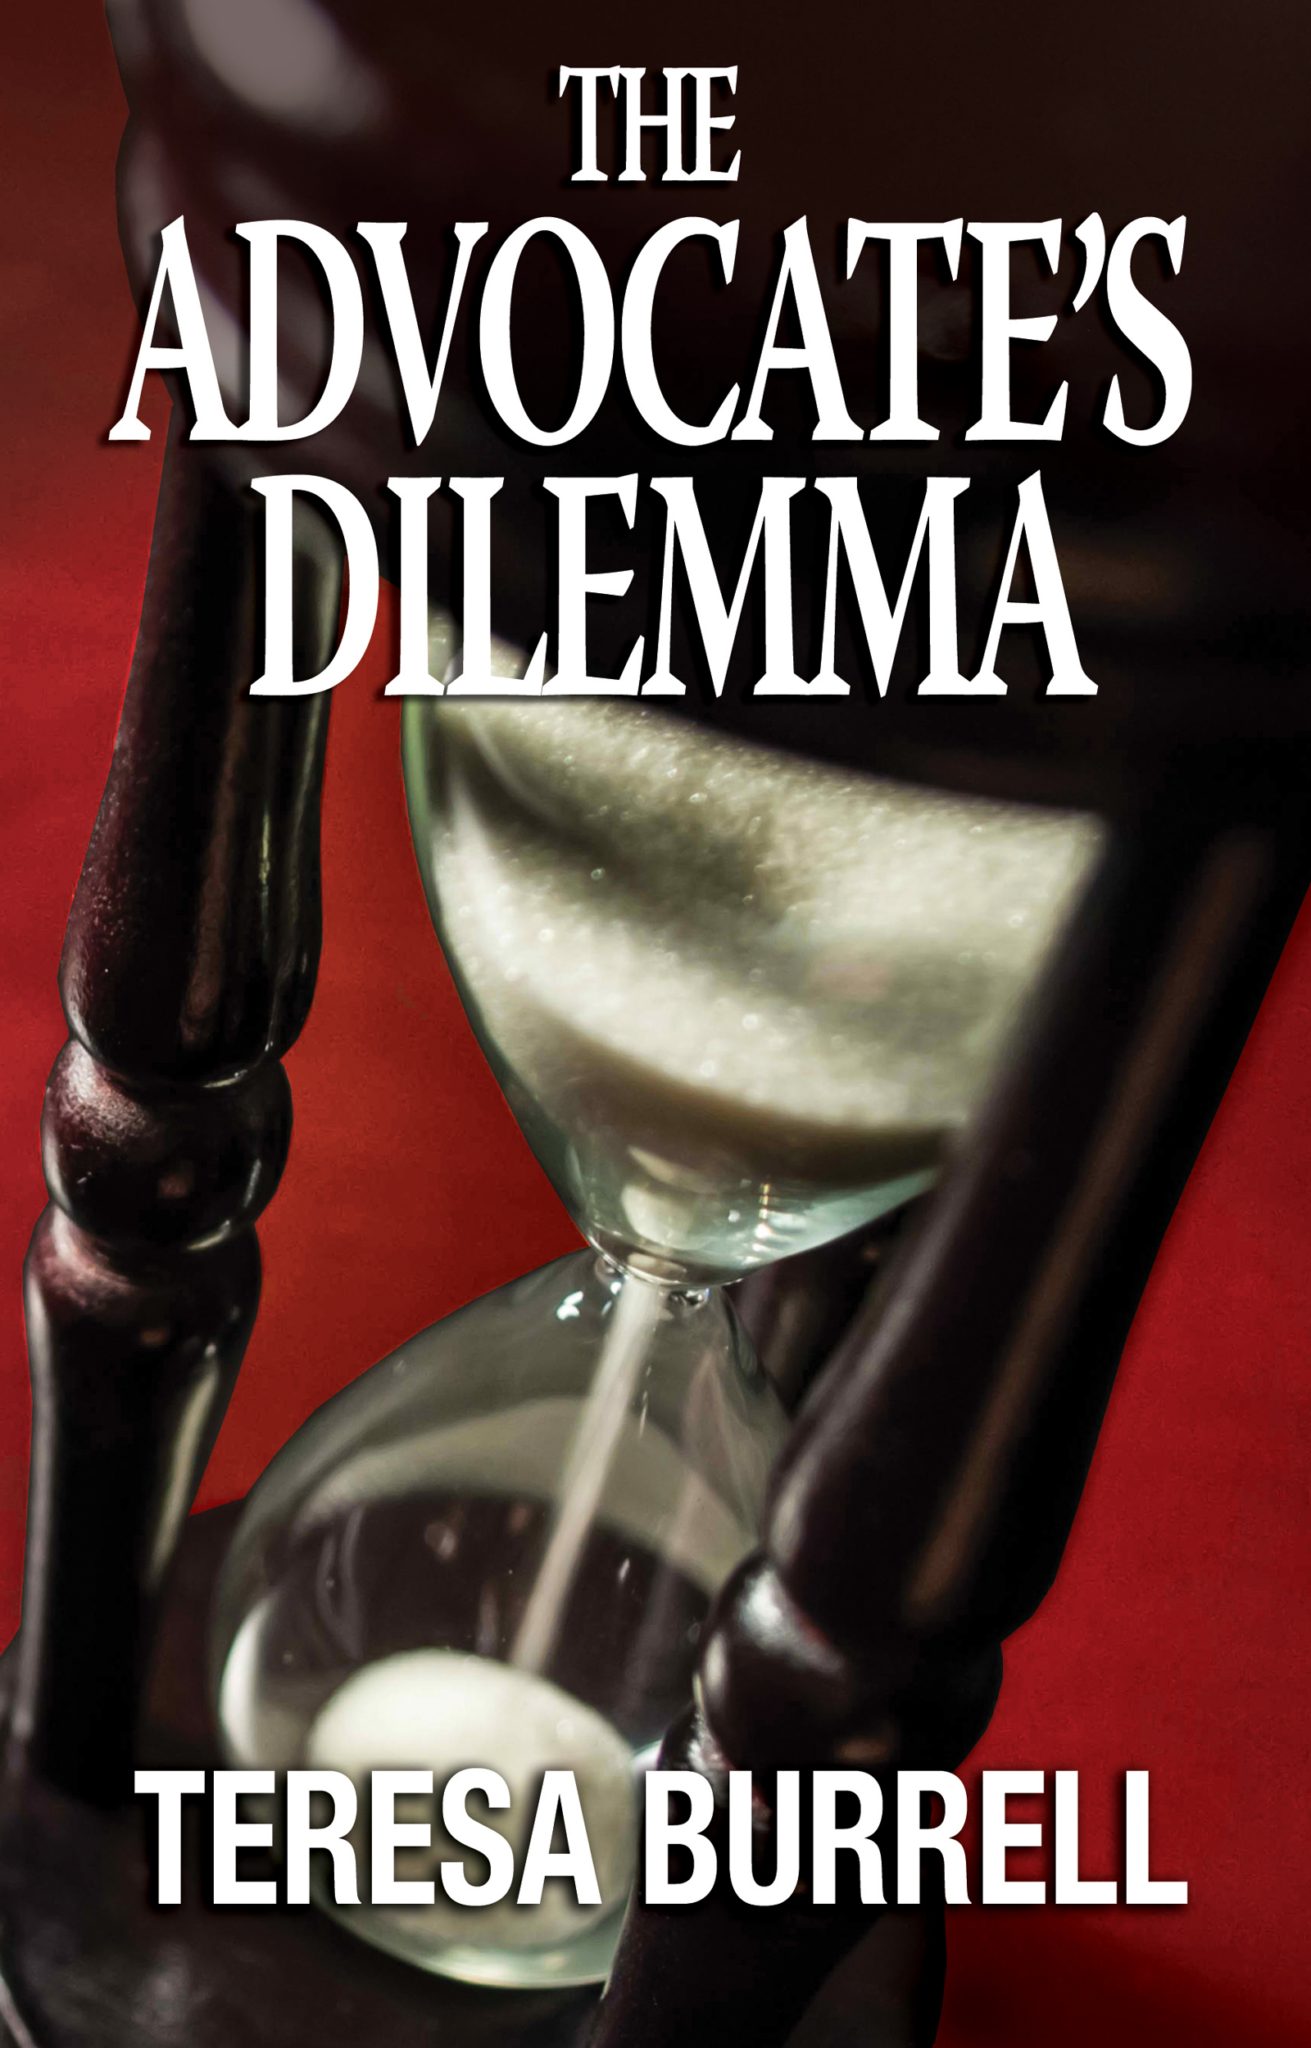 FREE: The Advocate’s Dilemma by Teresa Burrell